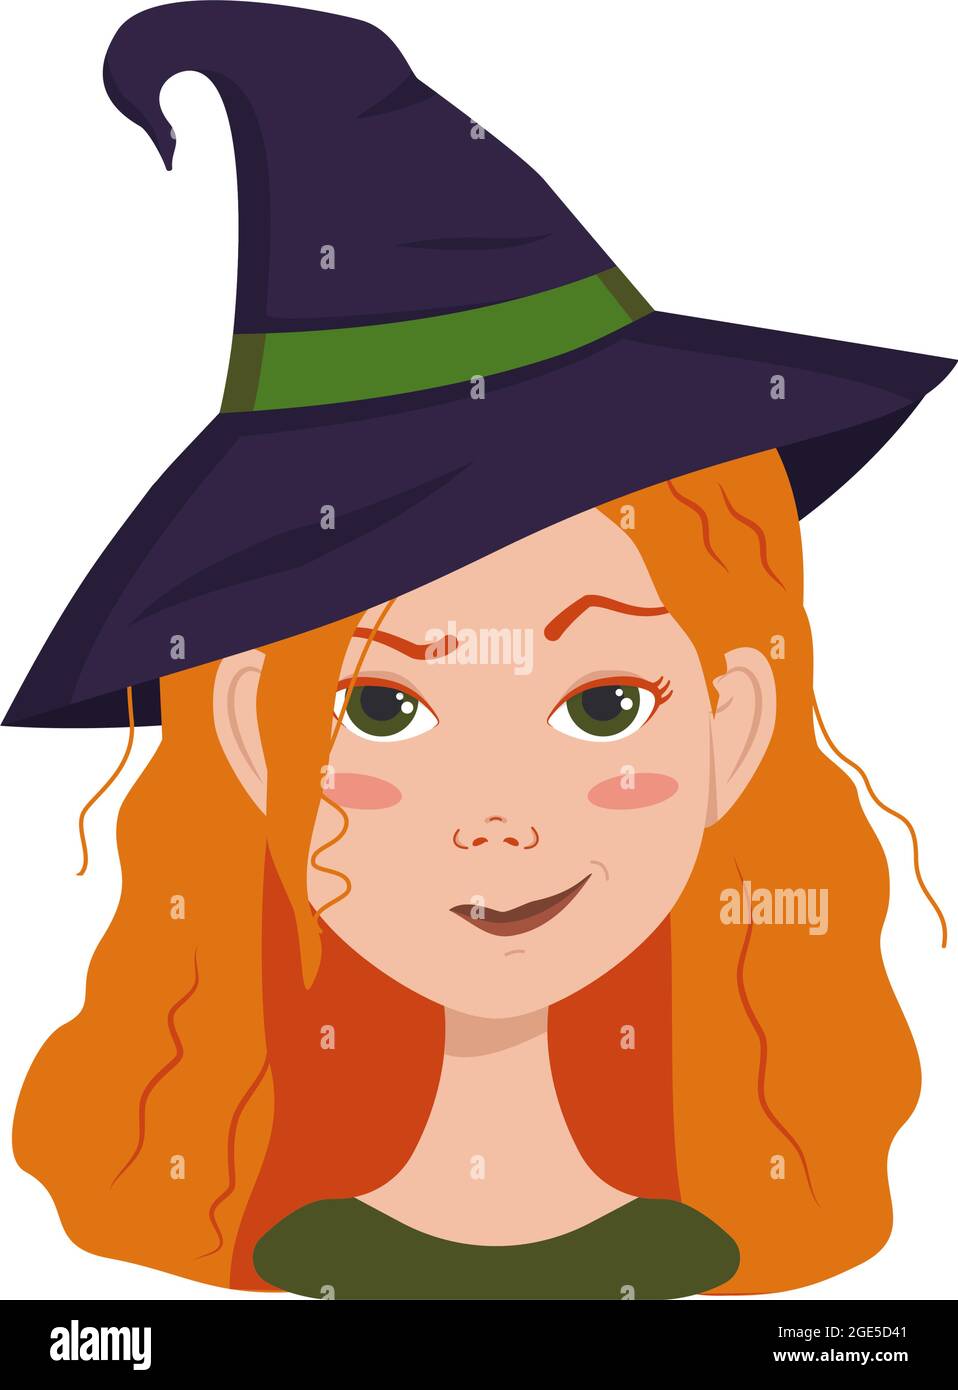 Avatar of a woman with red curly hair, emotions of suspicion, frowning face and pursed lips in a smirk wearing a witch hat. Girl with freckles in a suit for Halloween Stock Vector